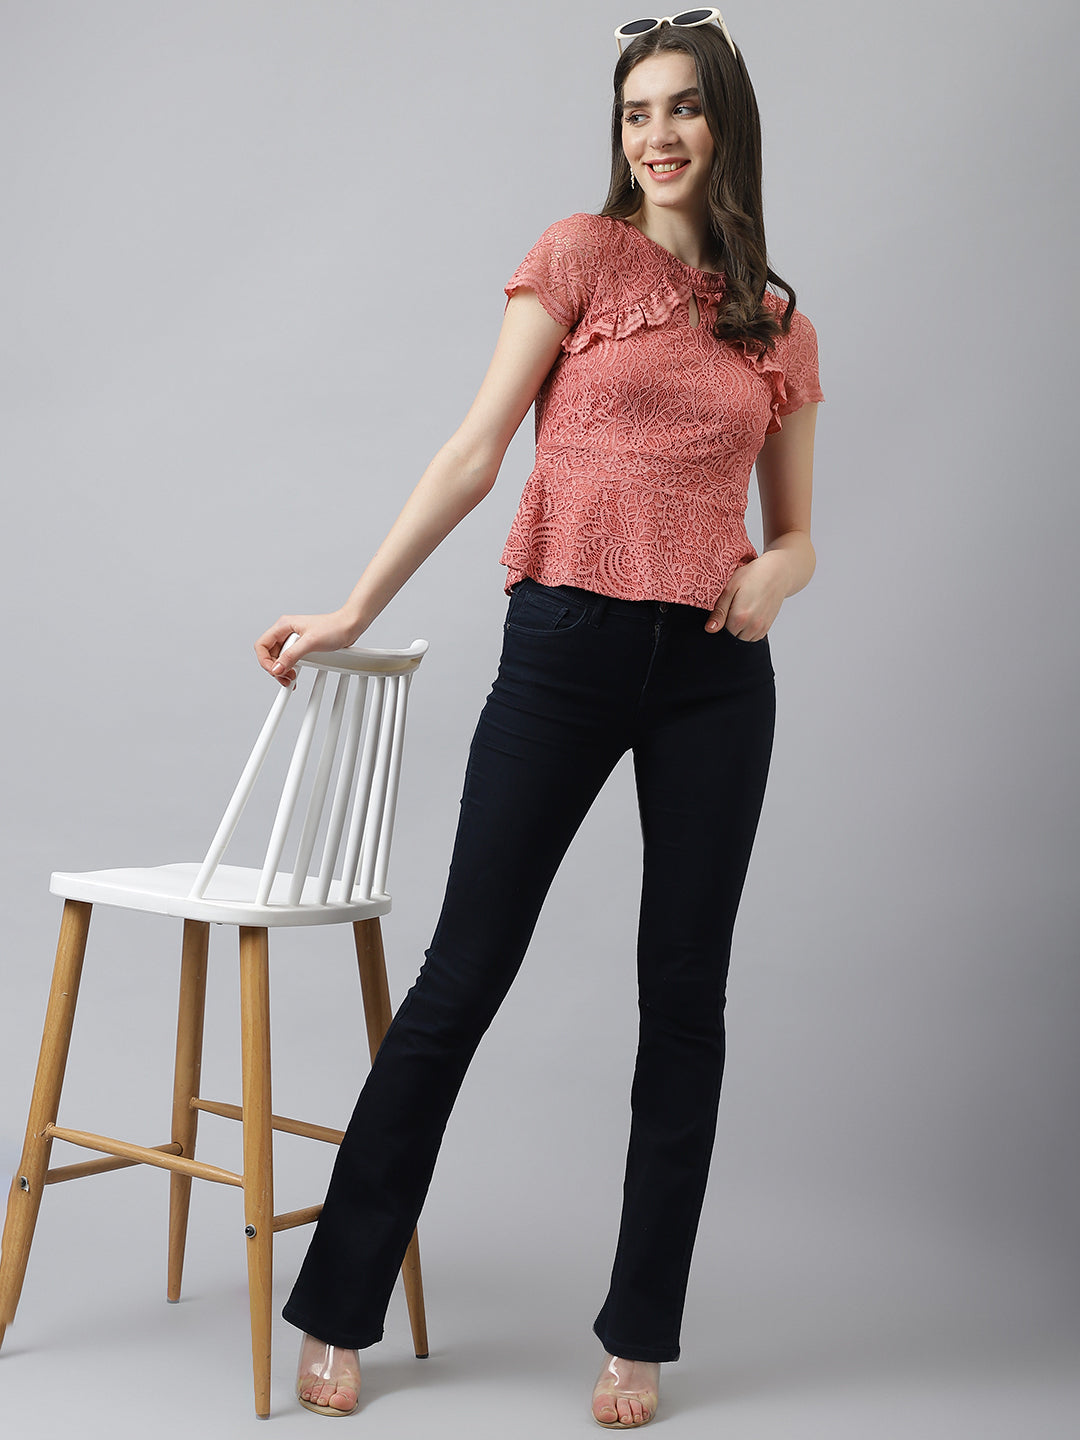 Rose Self Design Lace Top With Cap Sleeves & Ruffles